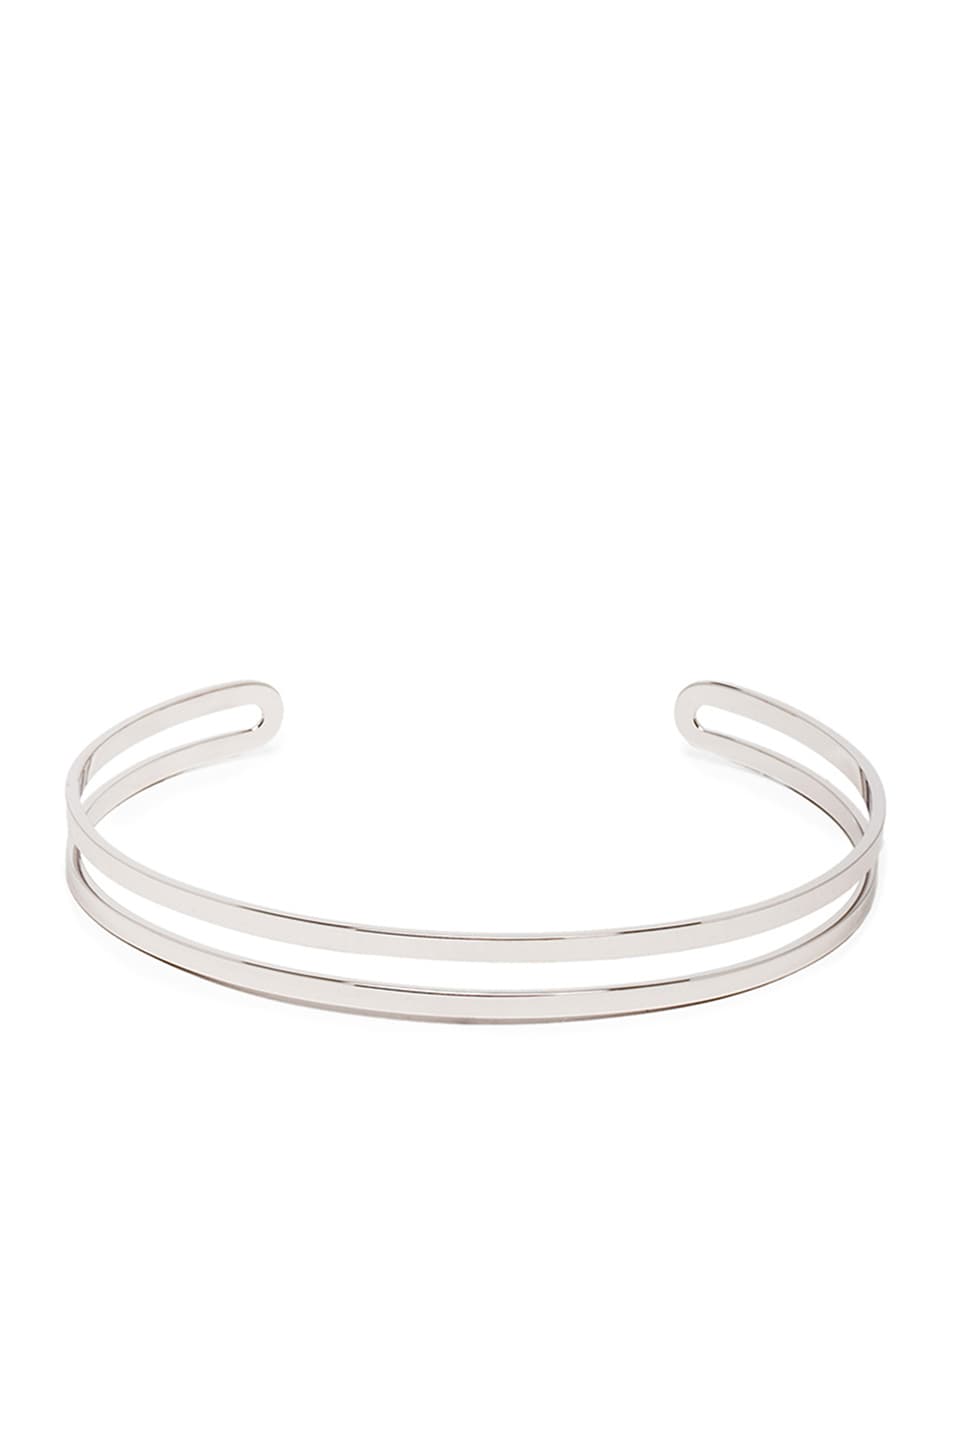 Image 1 of Maison Margiela Choker Necklace in Bight Silver